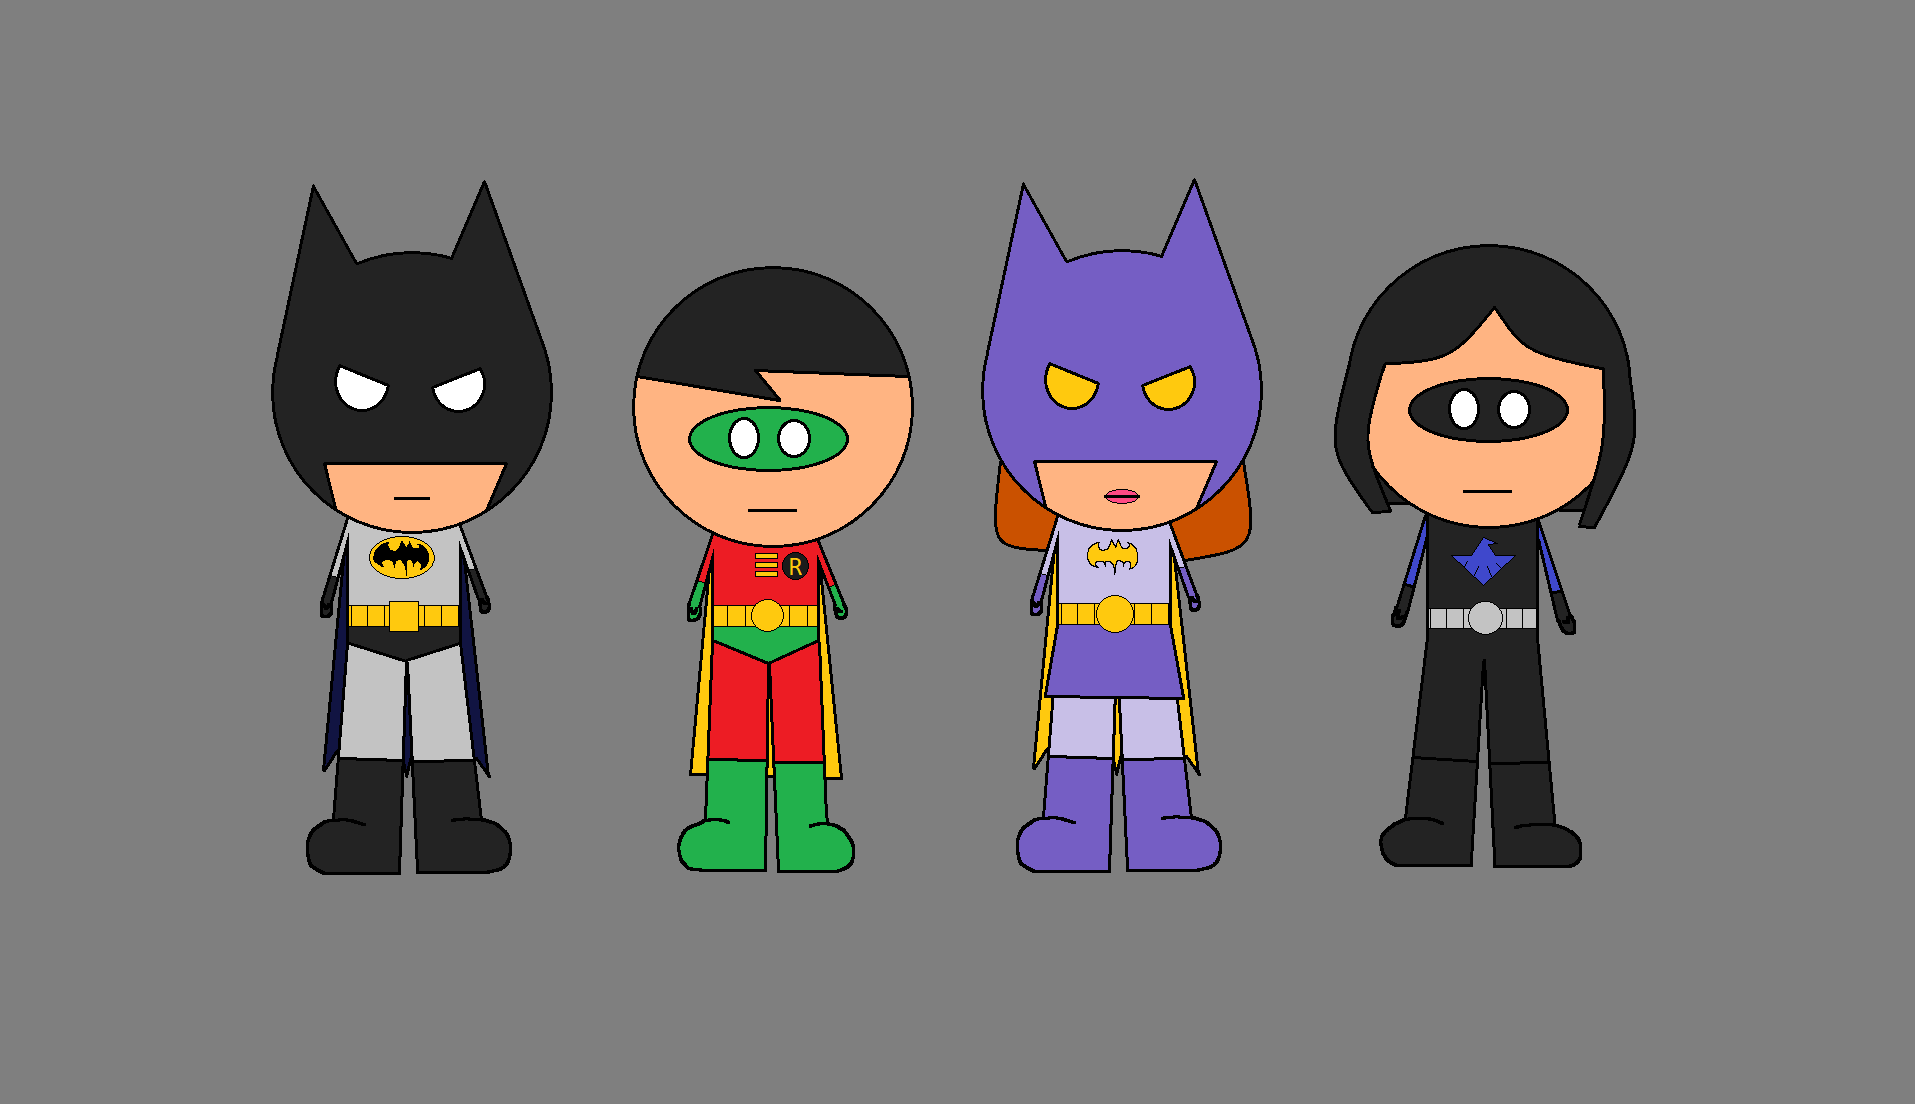 Batman, Robin, Batgirl, and Nightwing by mdfoote on DeviantArt